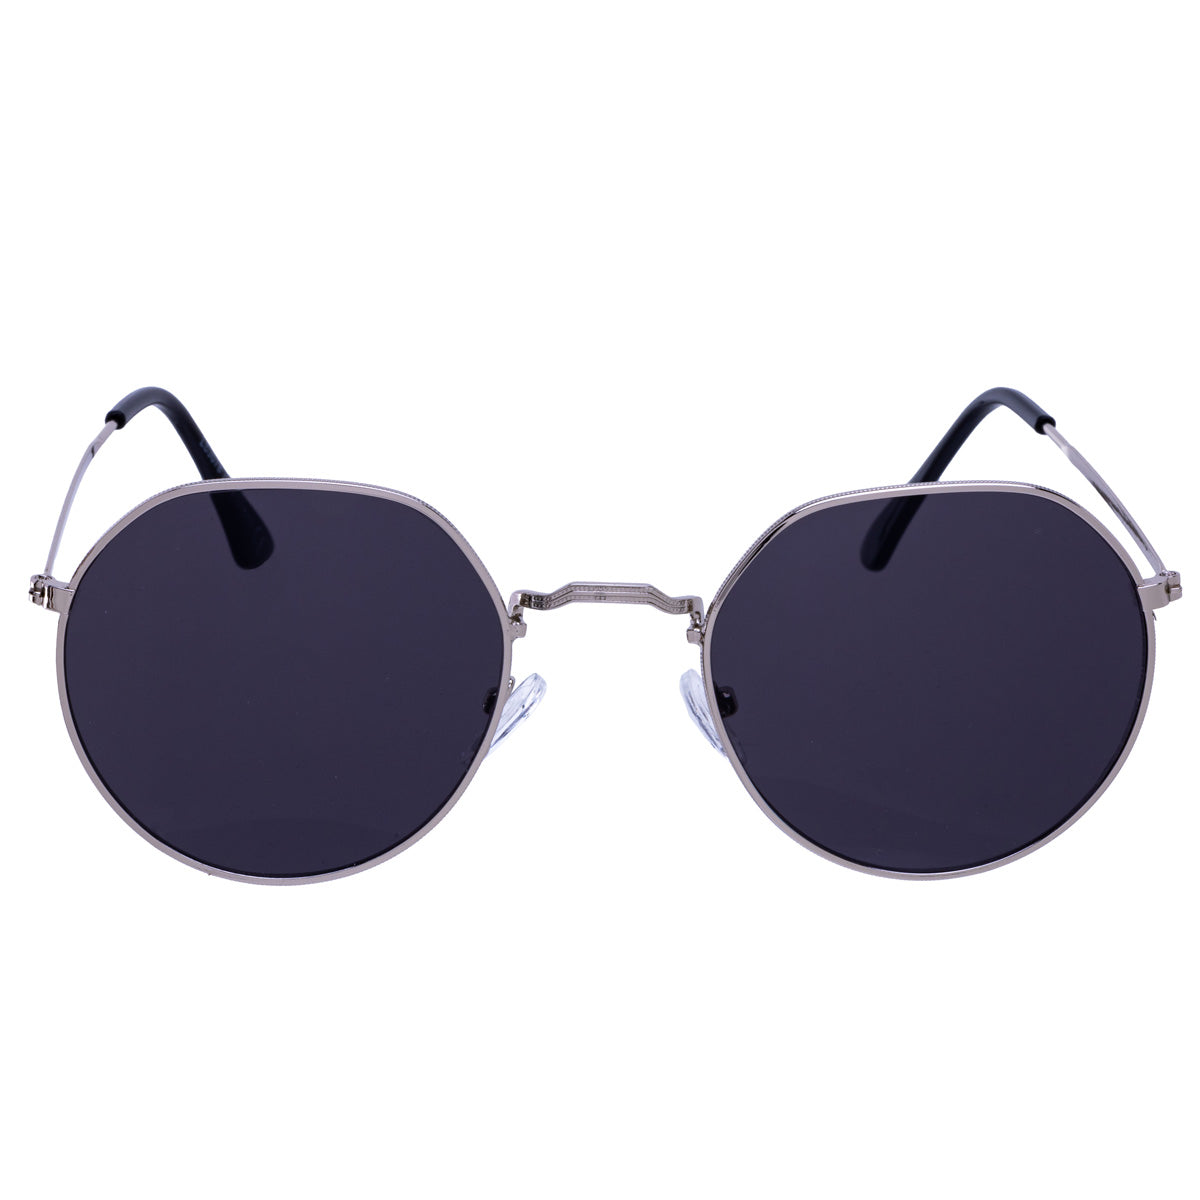 Round sunglasses with metal frames